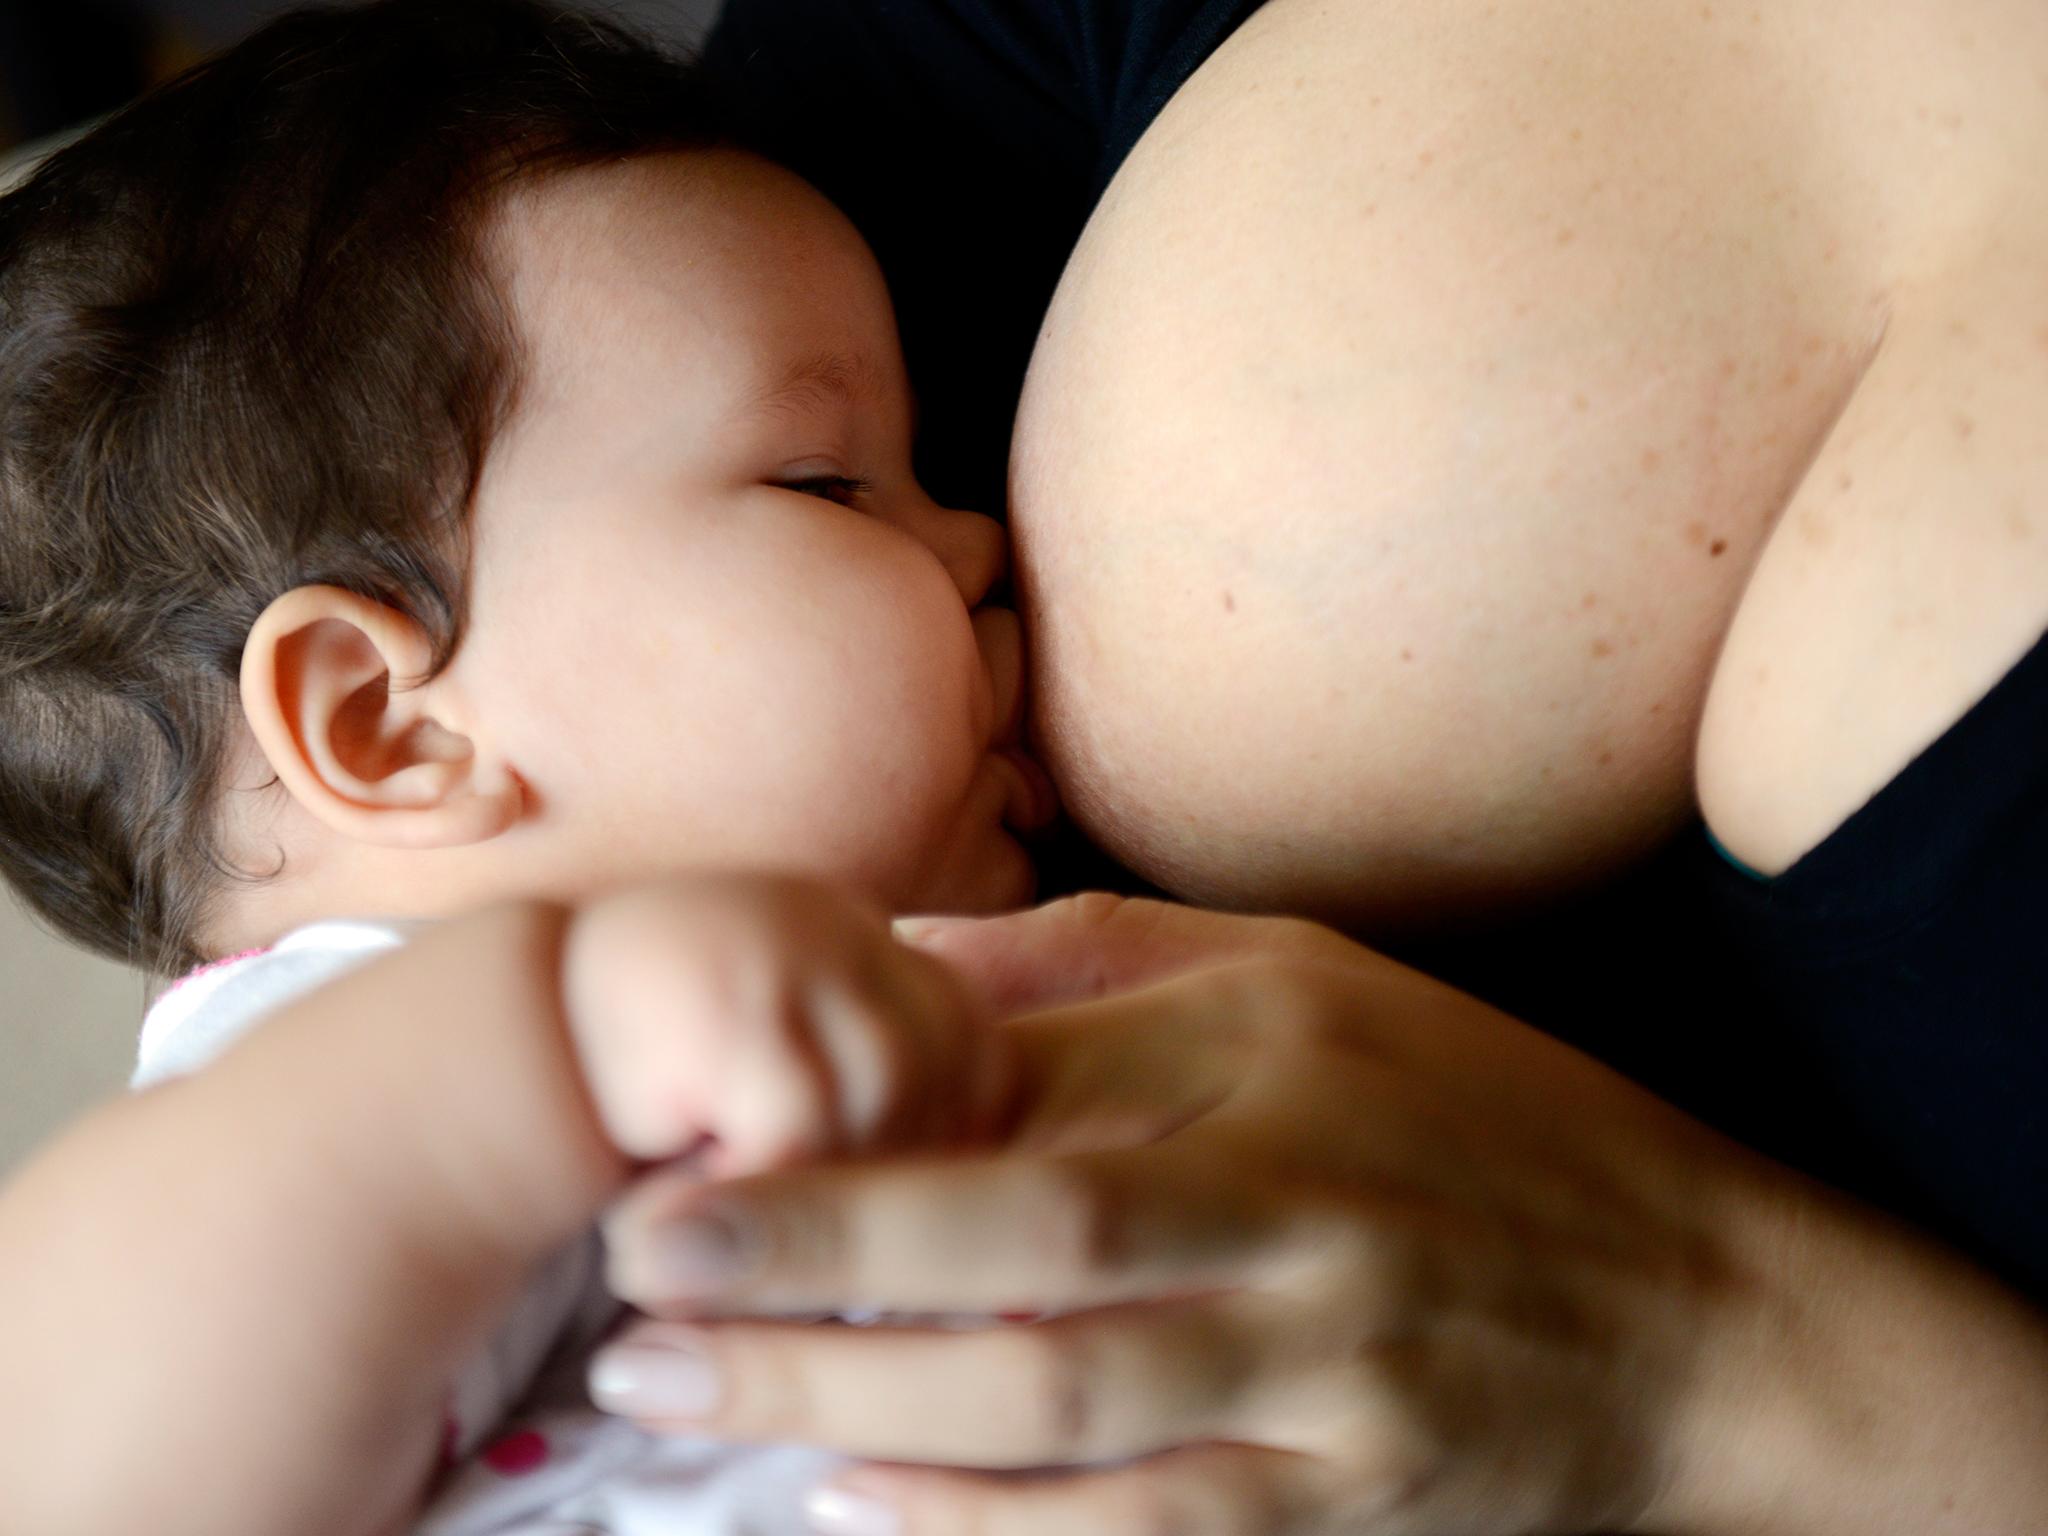 Pregnancy, breastfeeding may lower risk of early menopause: Study